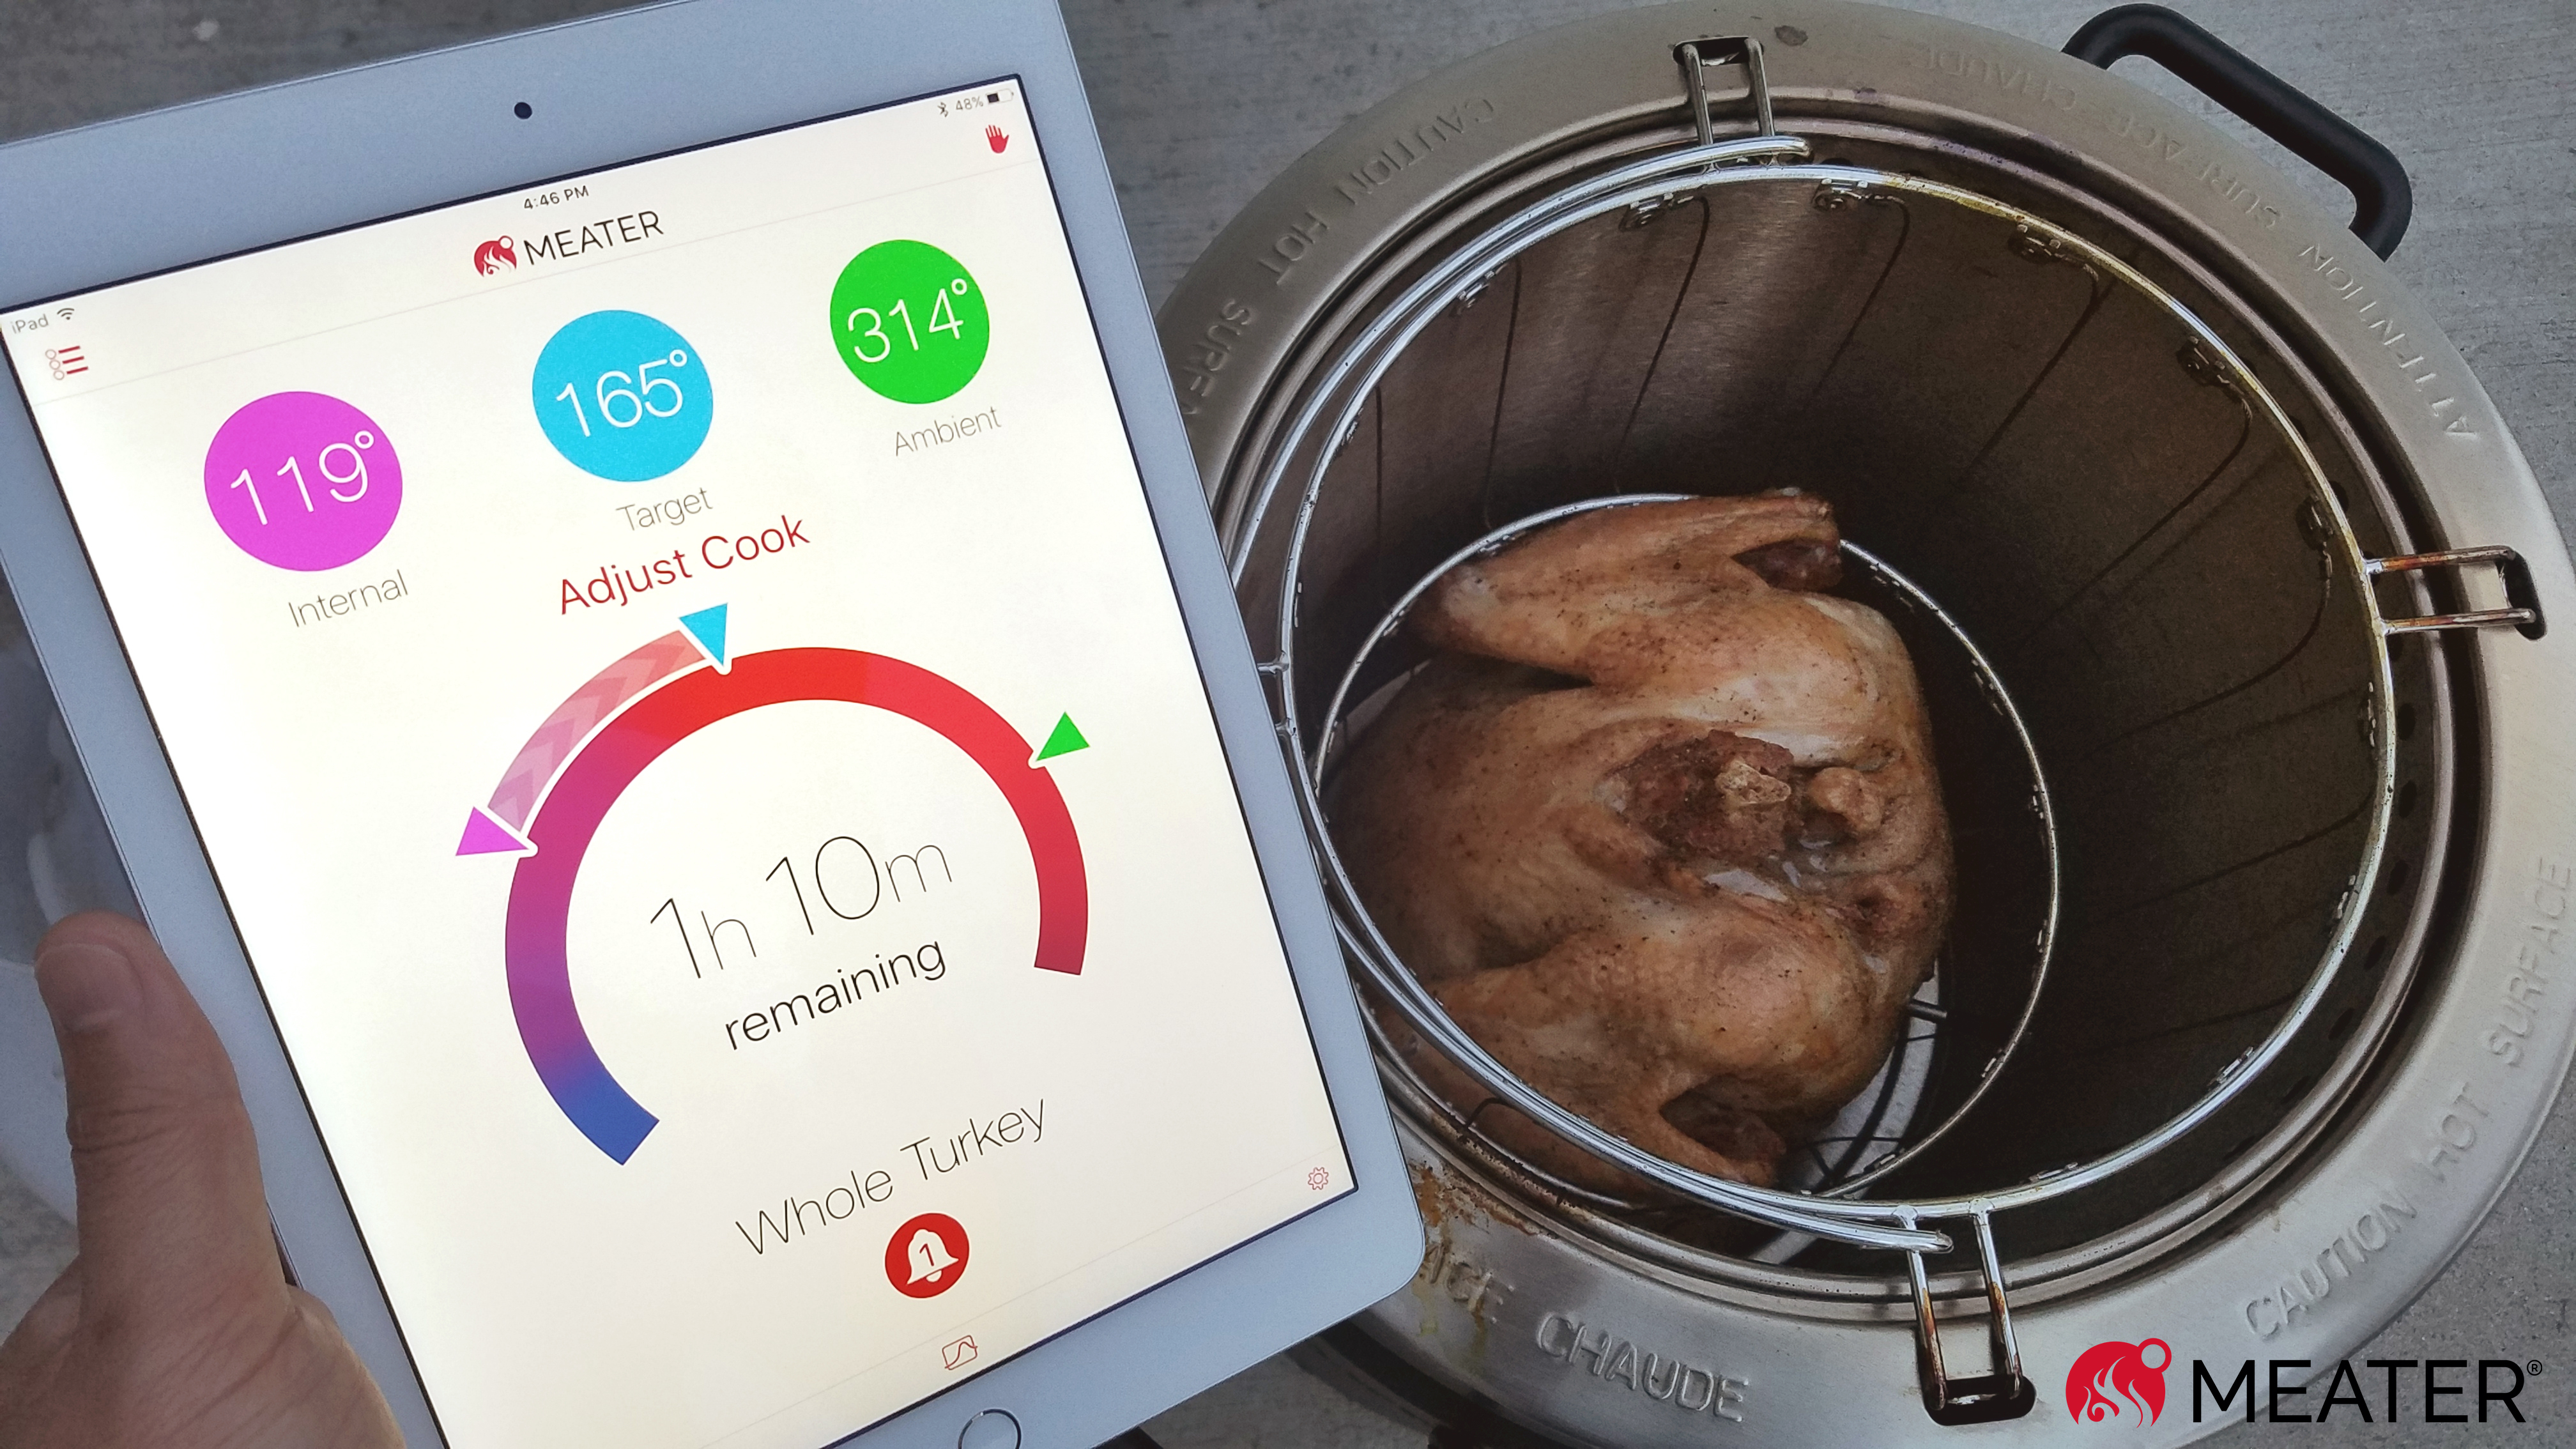 Yes, you can air fry your Thanksgiving turkey — here's how